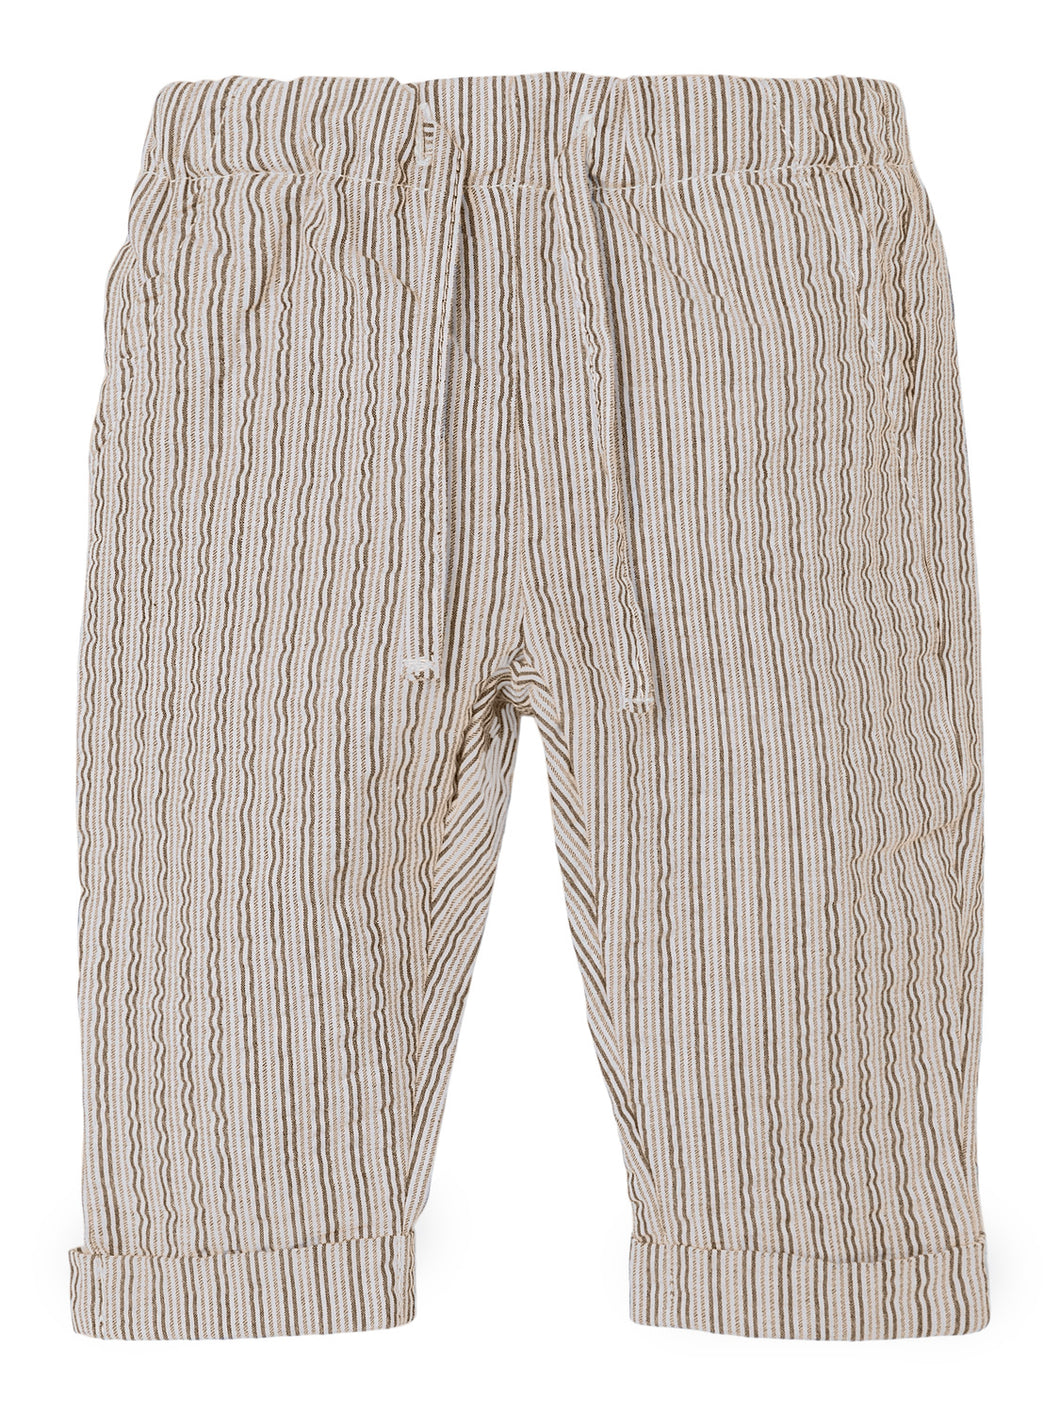 NBMFEROLLE Trousers - Humus